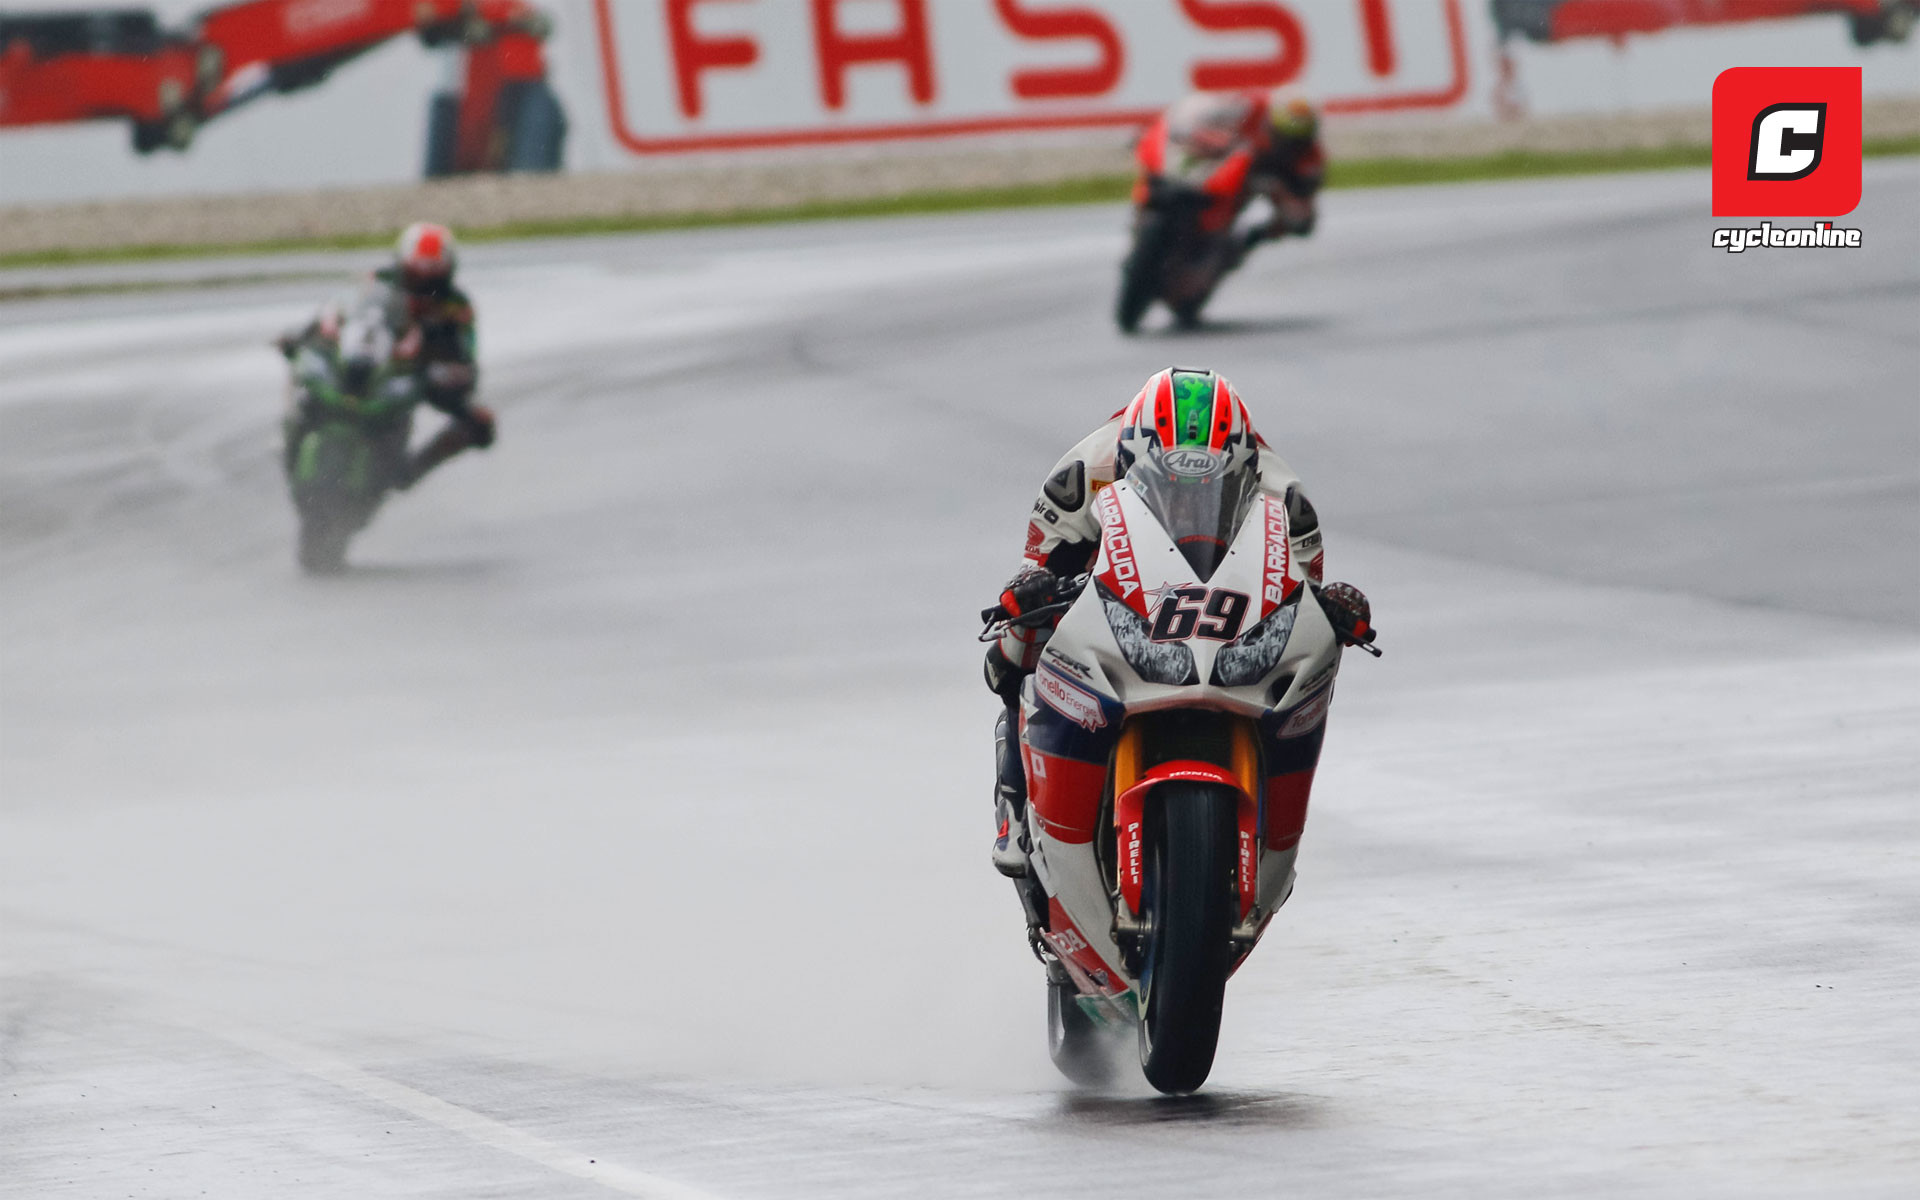 1920x1200 Ten years following his last race win in 2006, American Nicky Hayden  arrived in victory lane of World Superbike with a stunning ride in the wet  at Sepang, ...